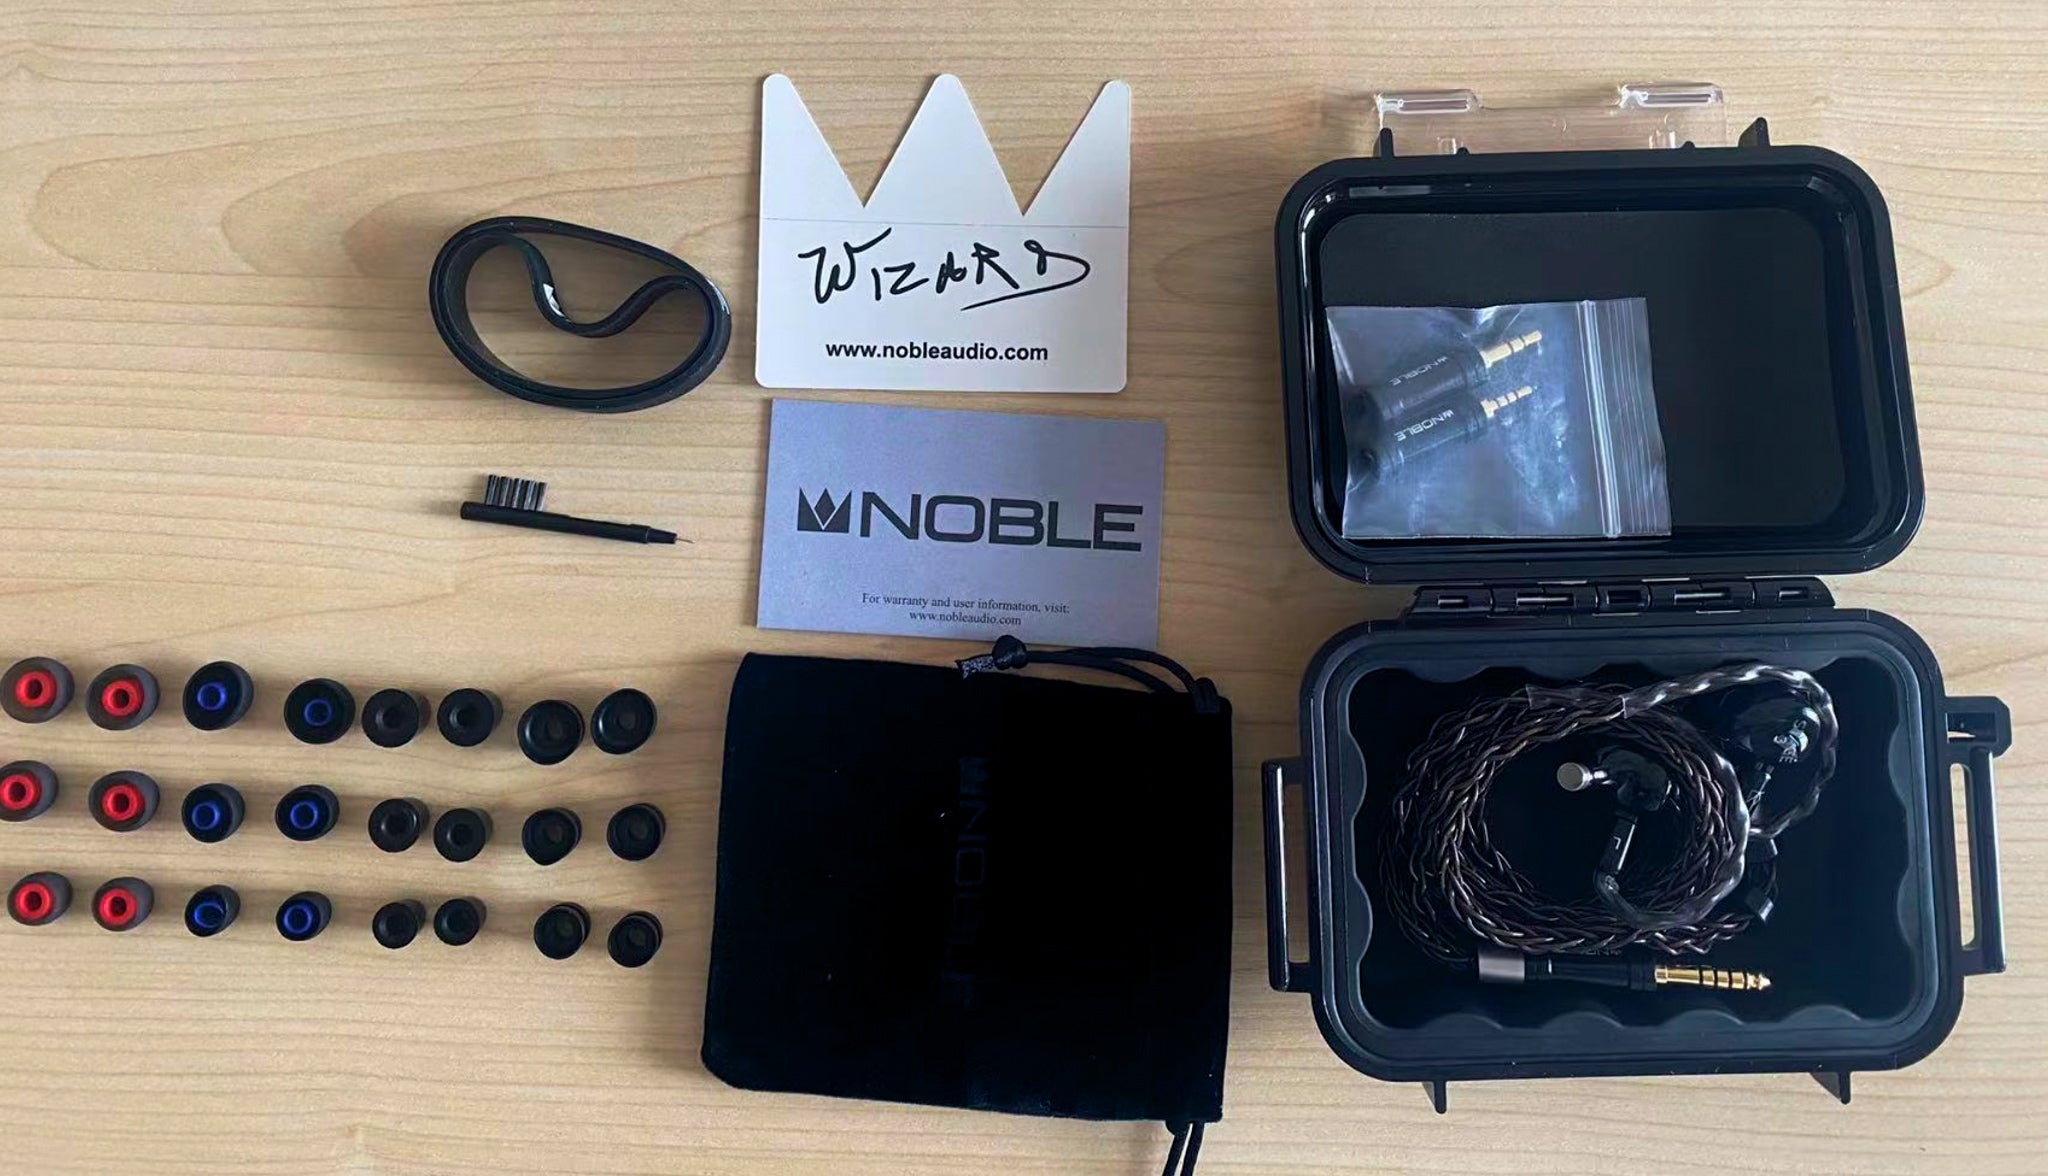 Noble Stage 3 earphones and all included accessories